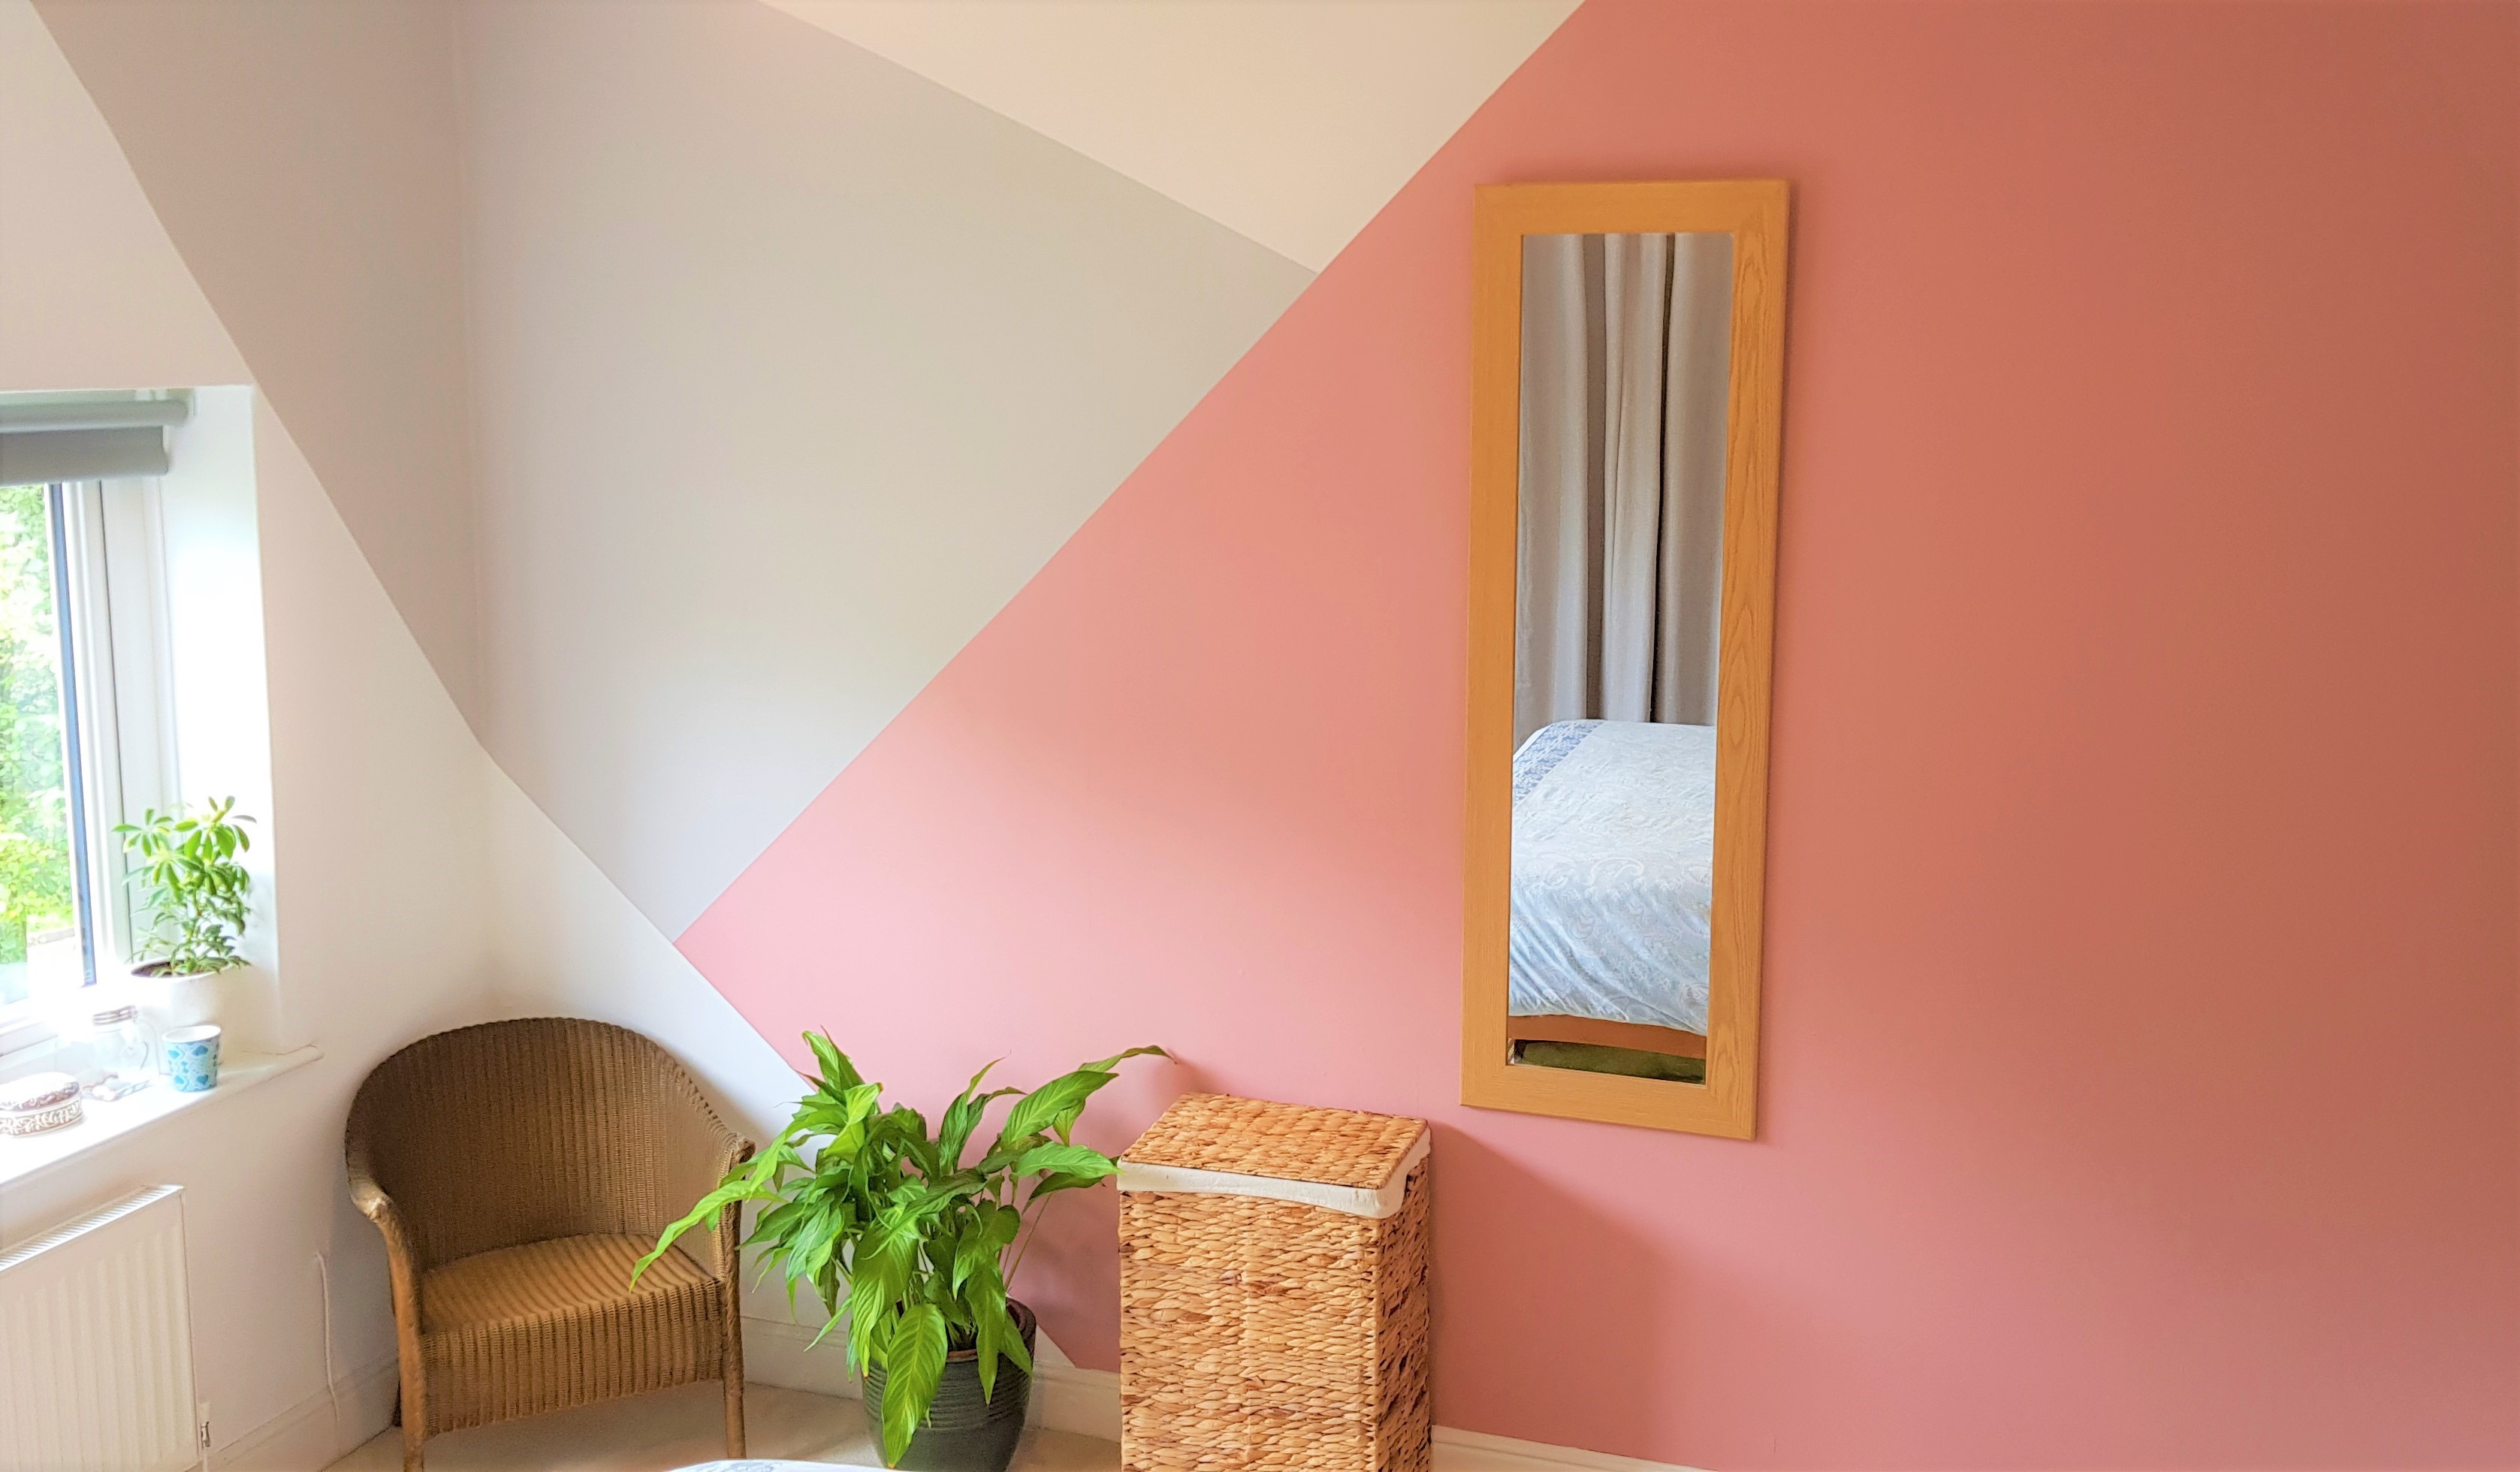 A stylish interior with geometric wall patterns, a mirror, a wicker chair, and a potted plant